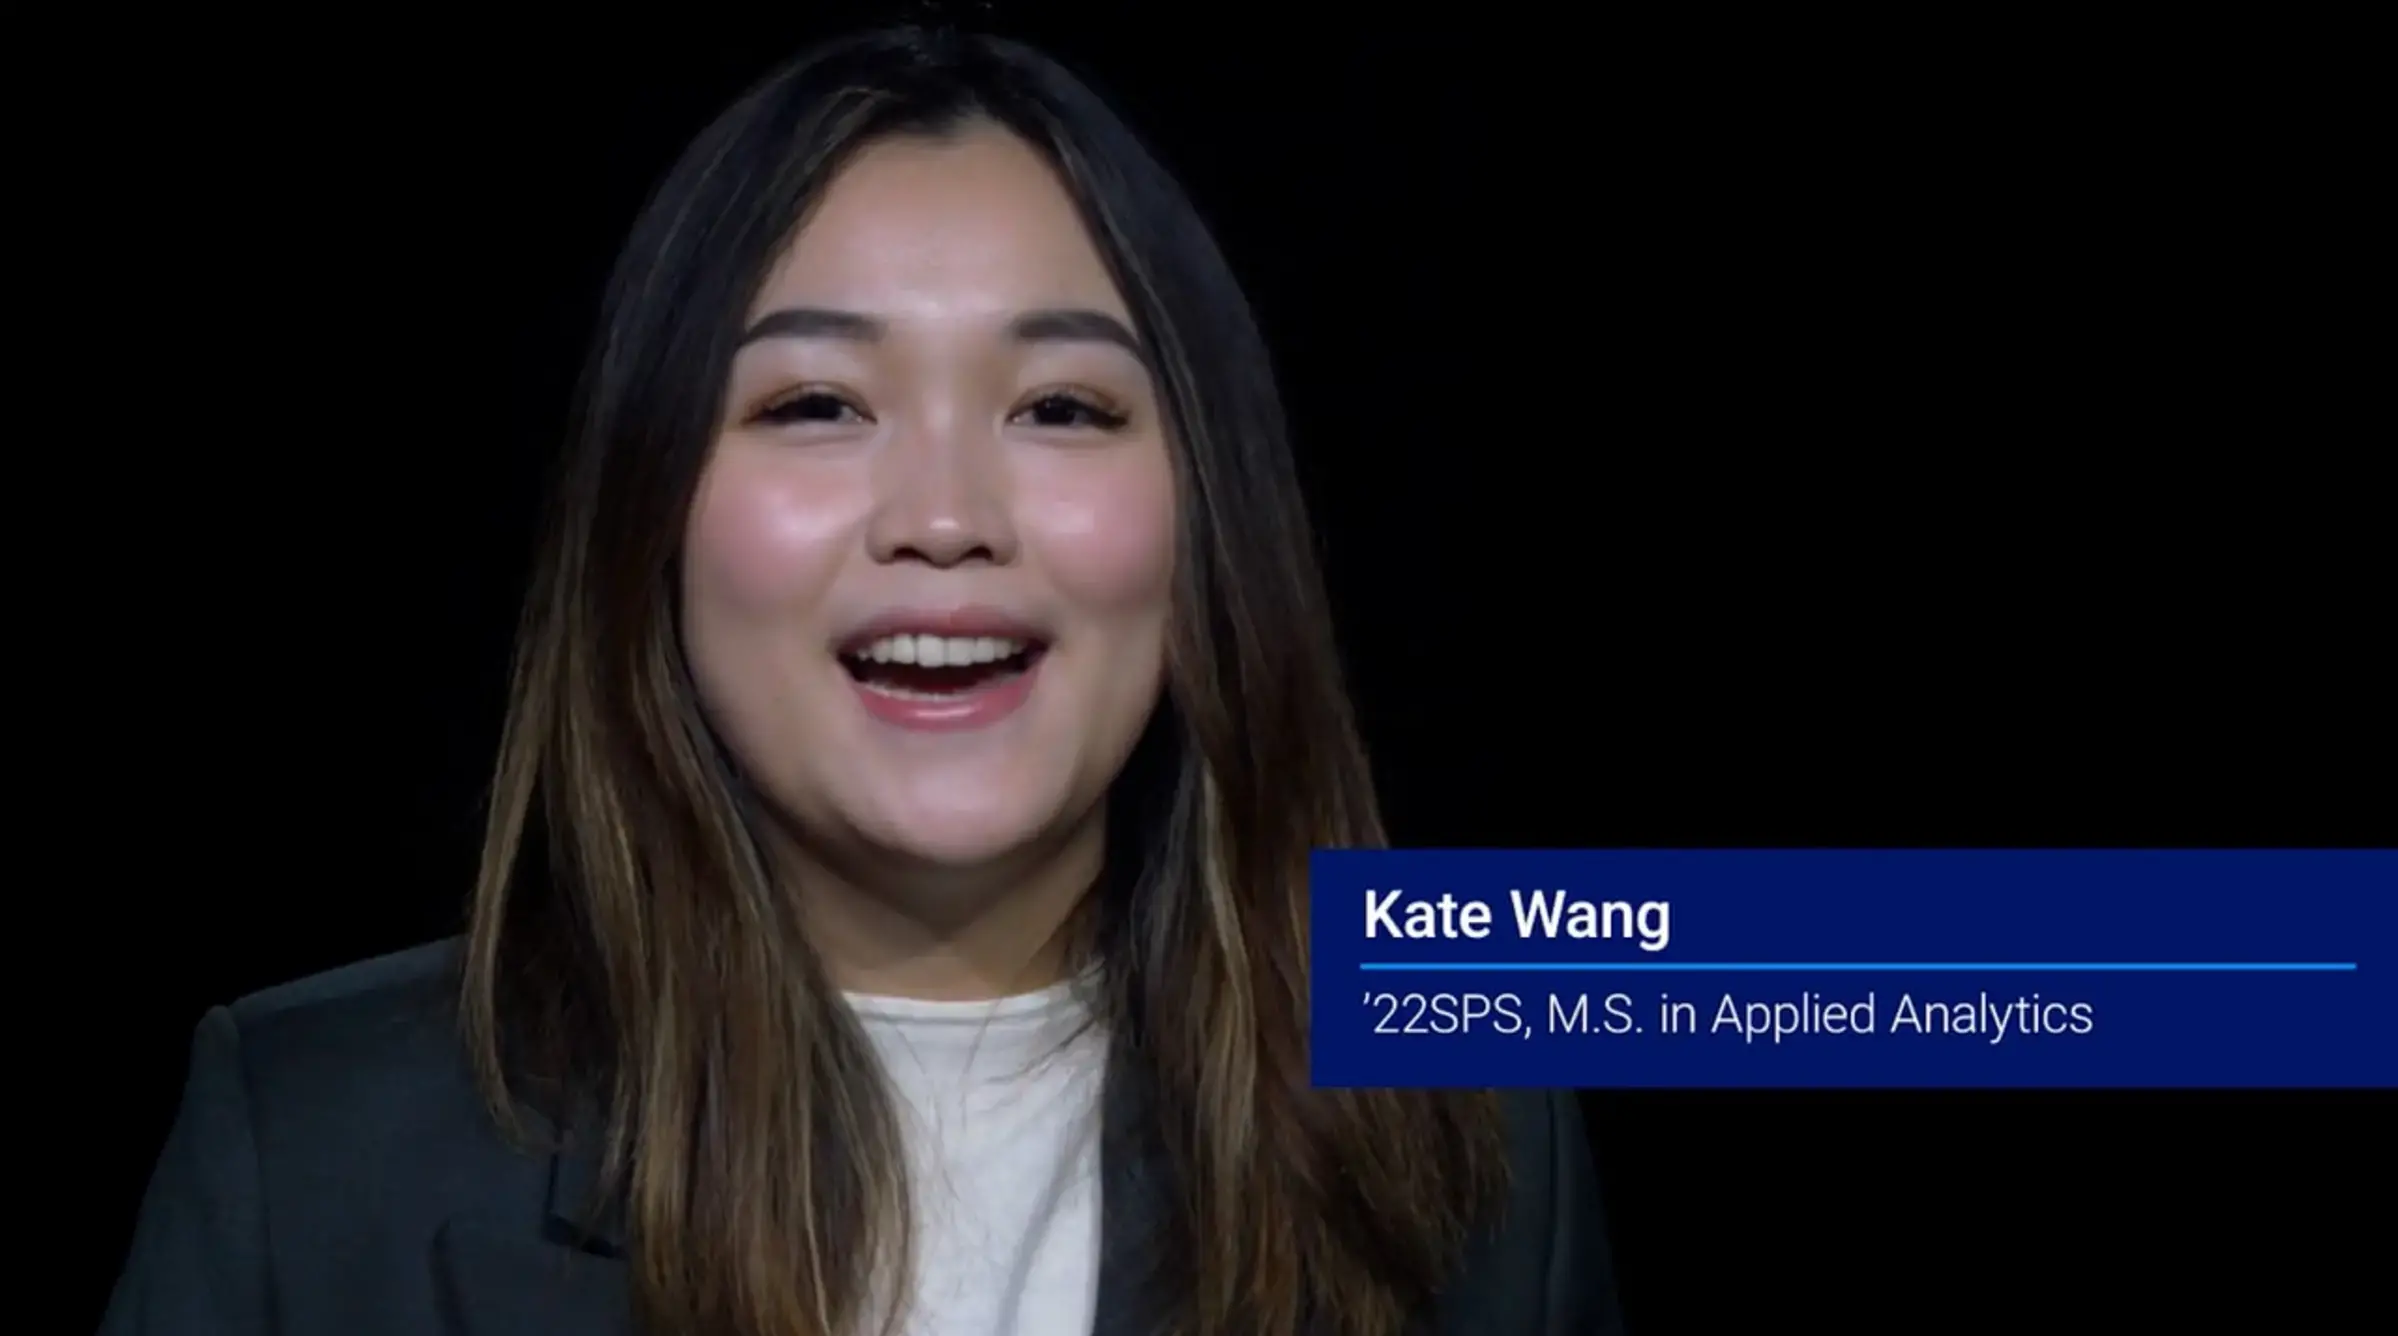 Outgoing SPSSG President Kate Wang Shares What She Enjoys About Student Life at Columbia